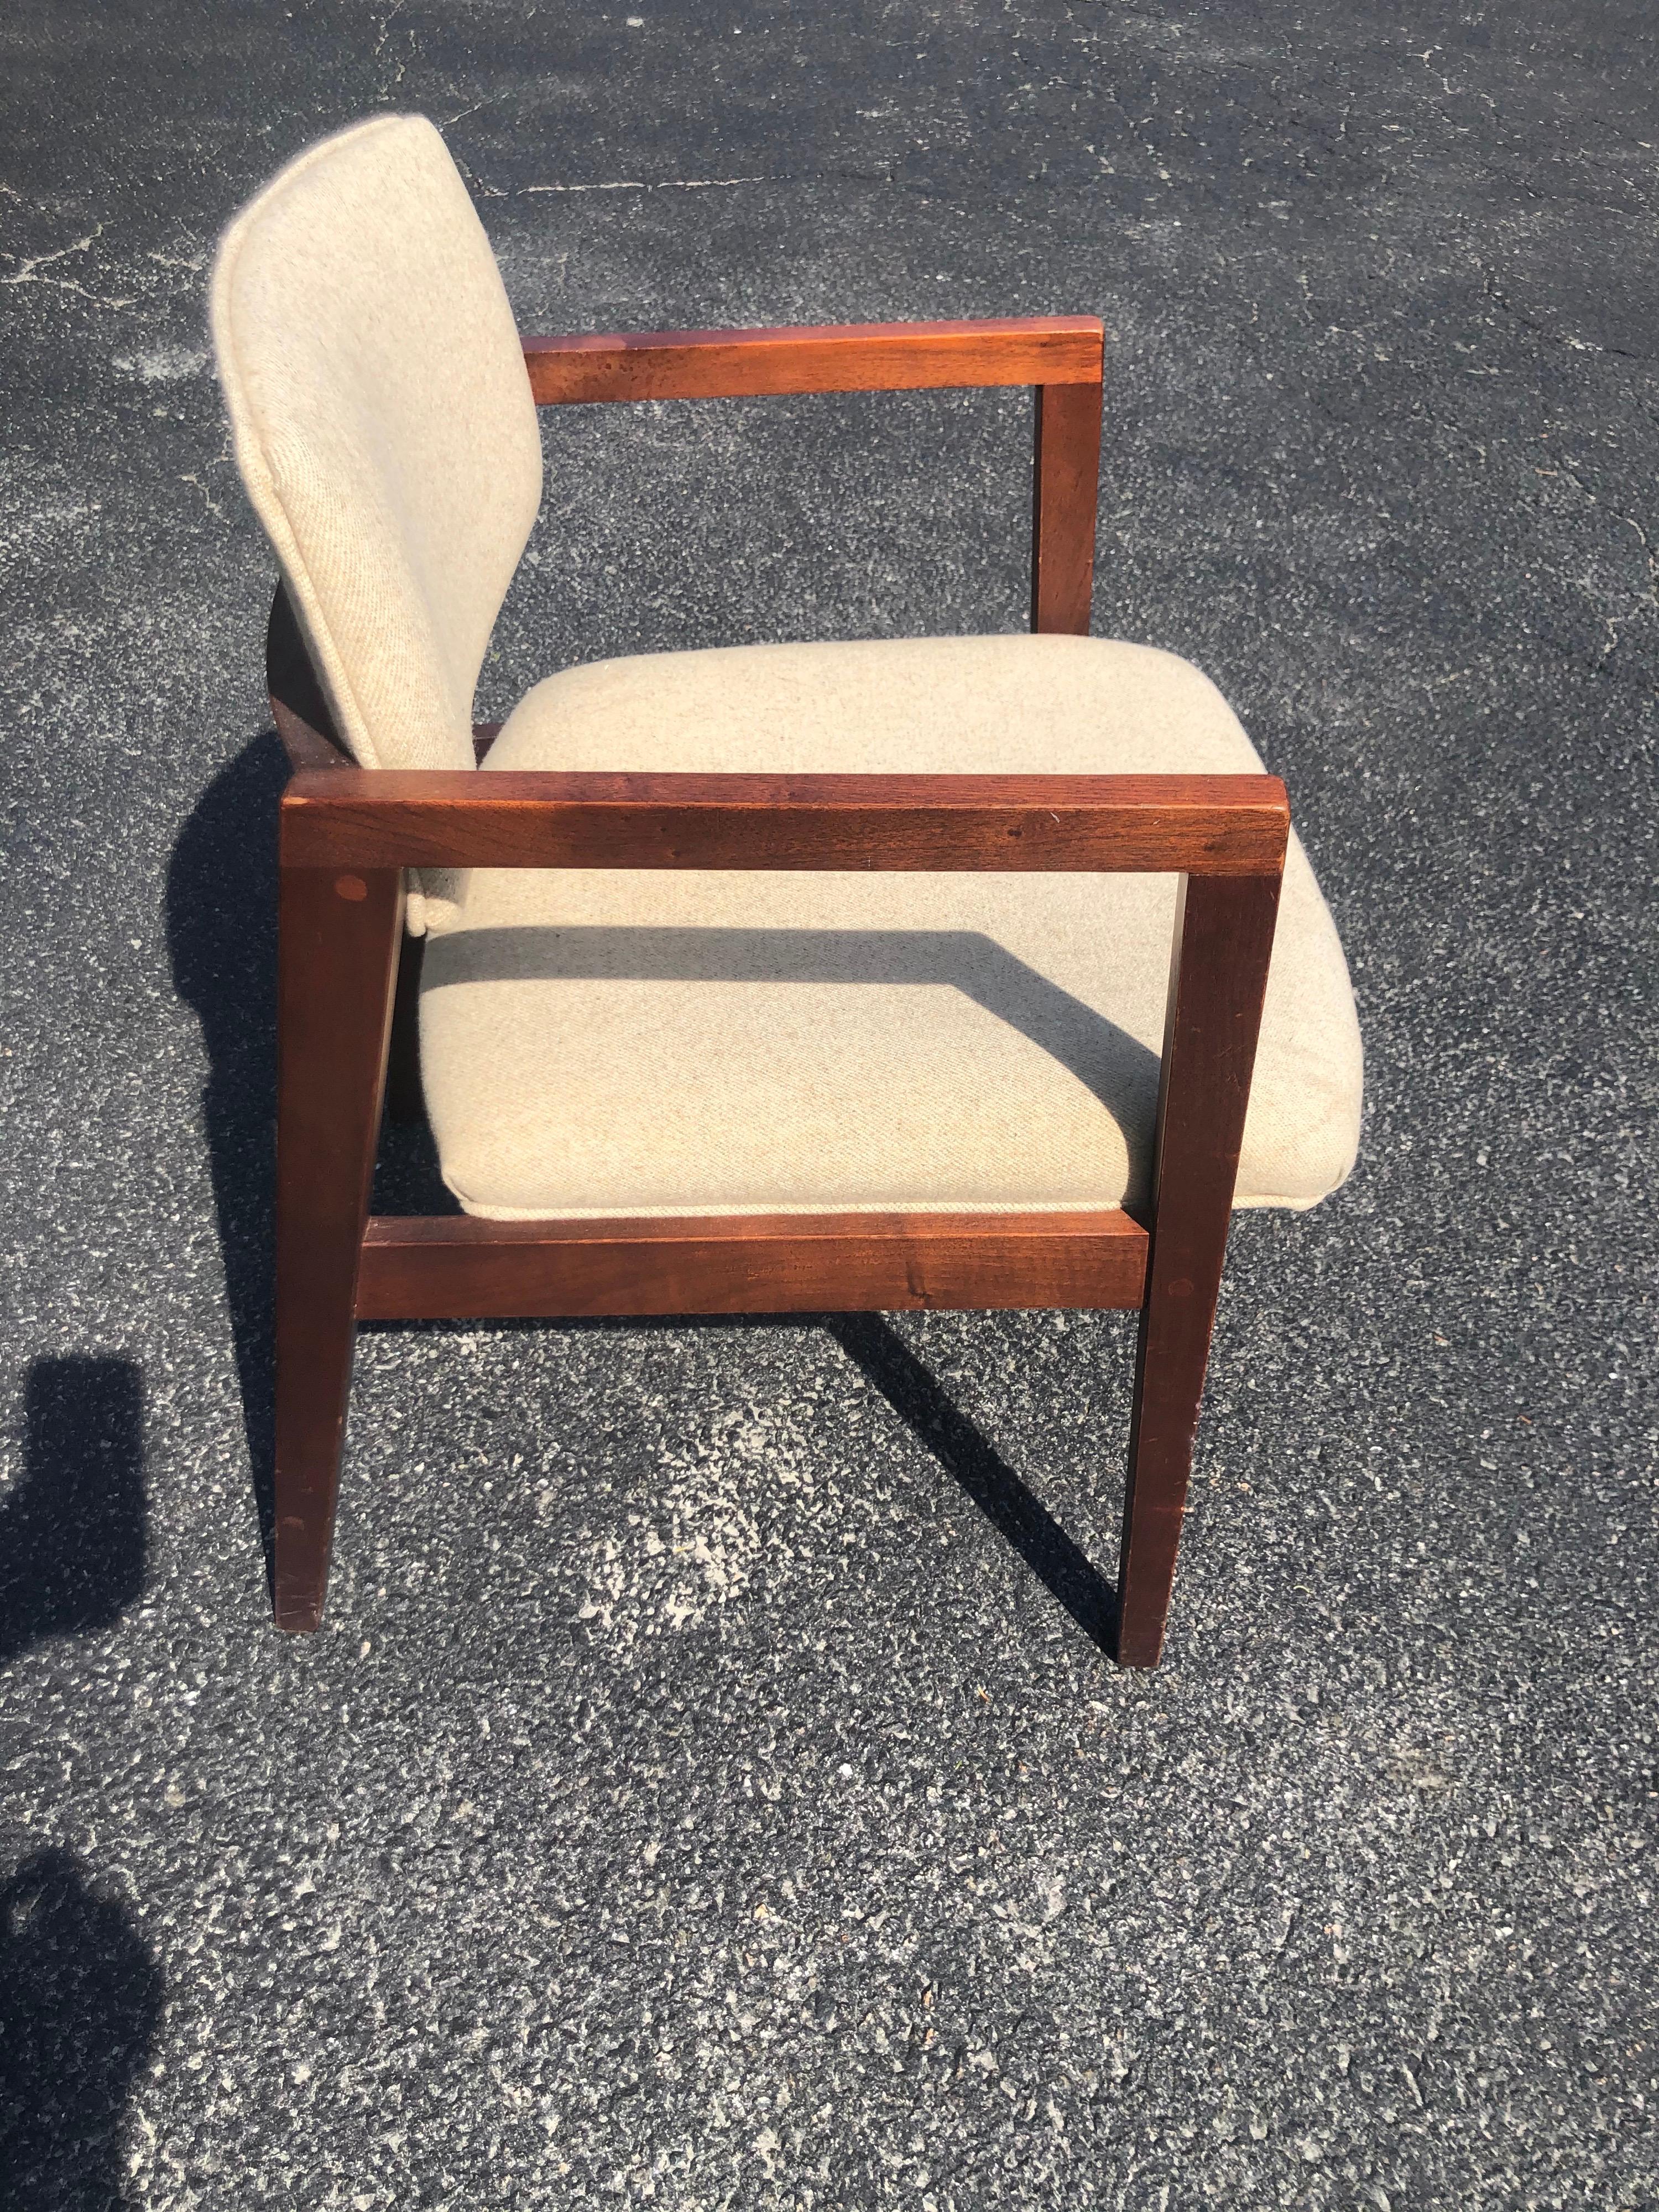 Mid century office chair by Marble Imperial Furniture. Classic style with neutral upholstery and clean lines.
Seat depth is 20 in. Seat depth is 20 in. The arm height is 26